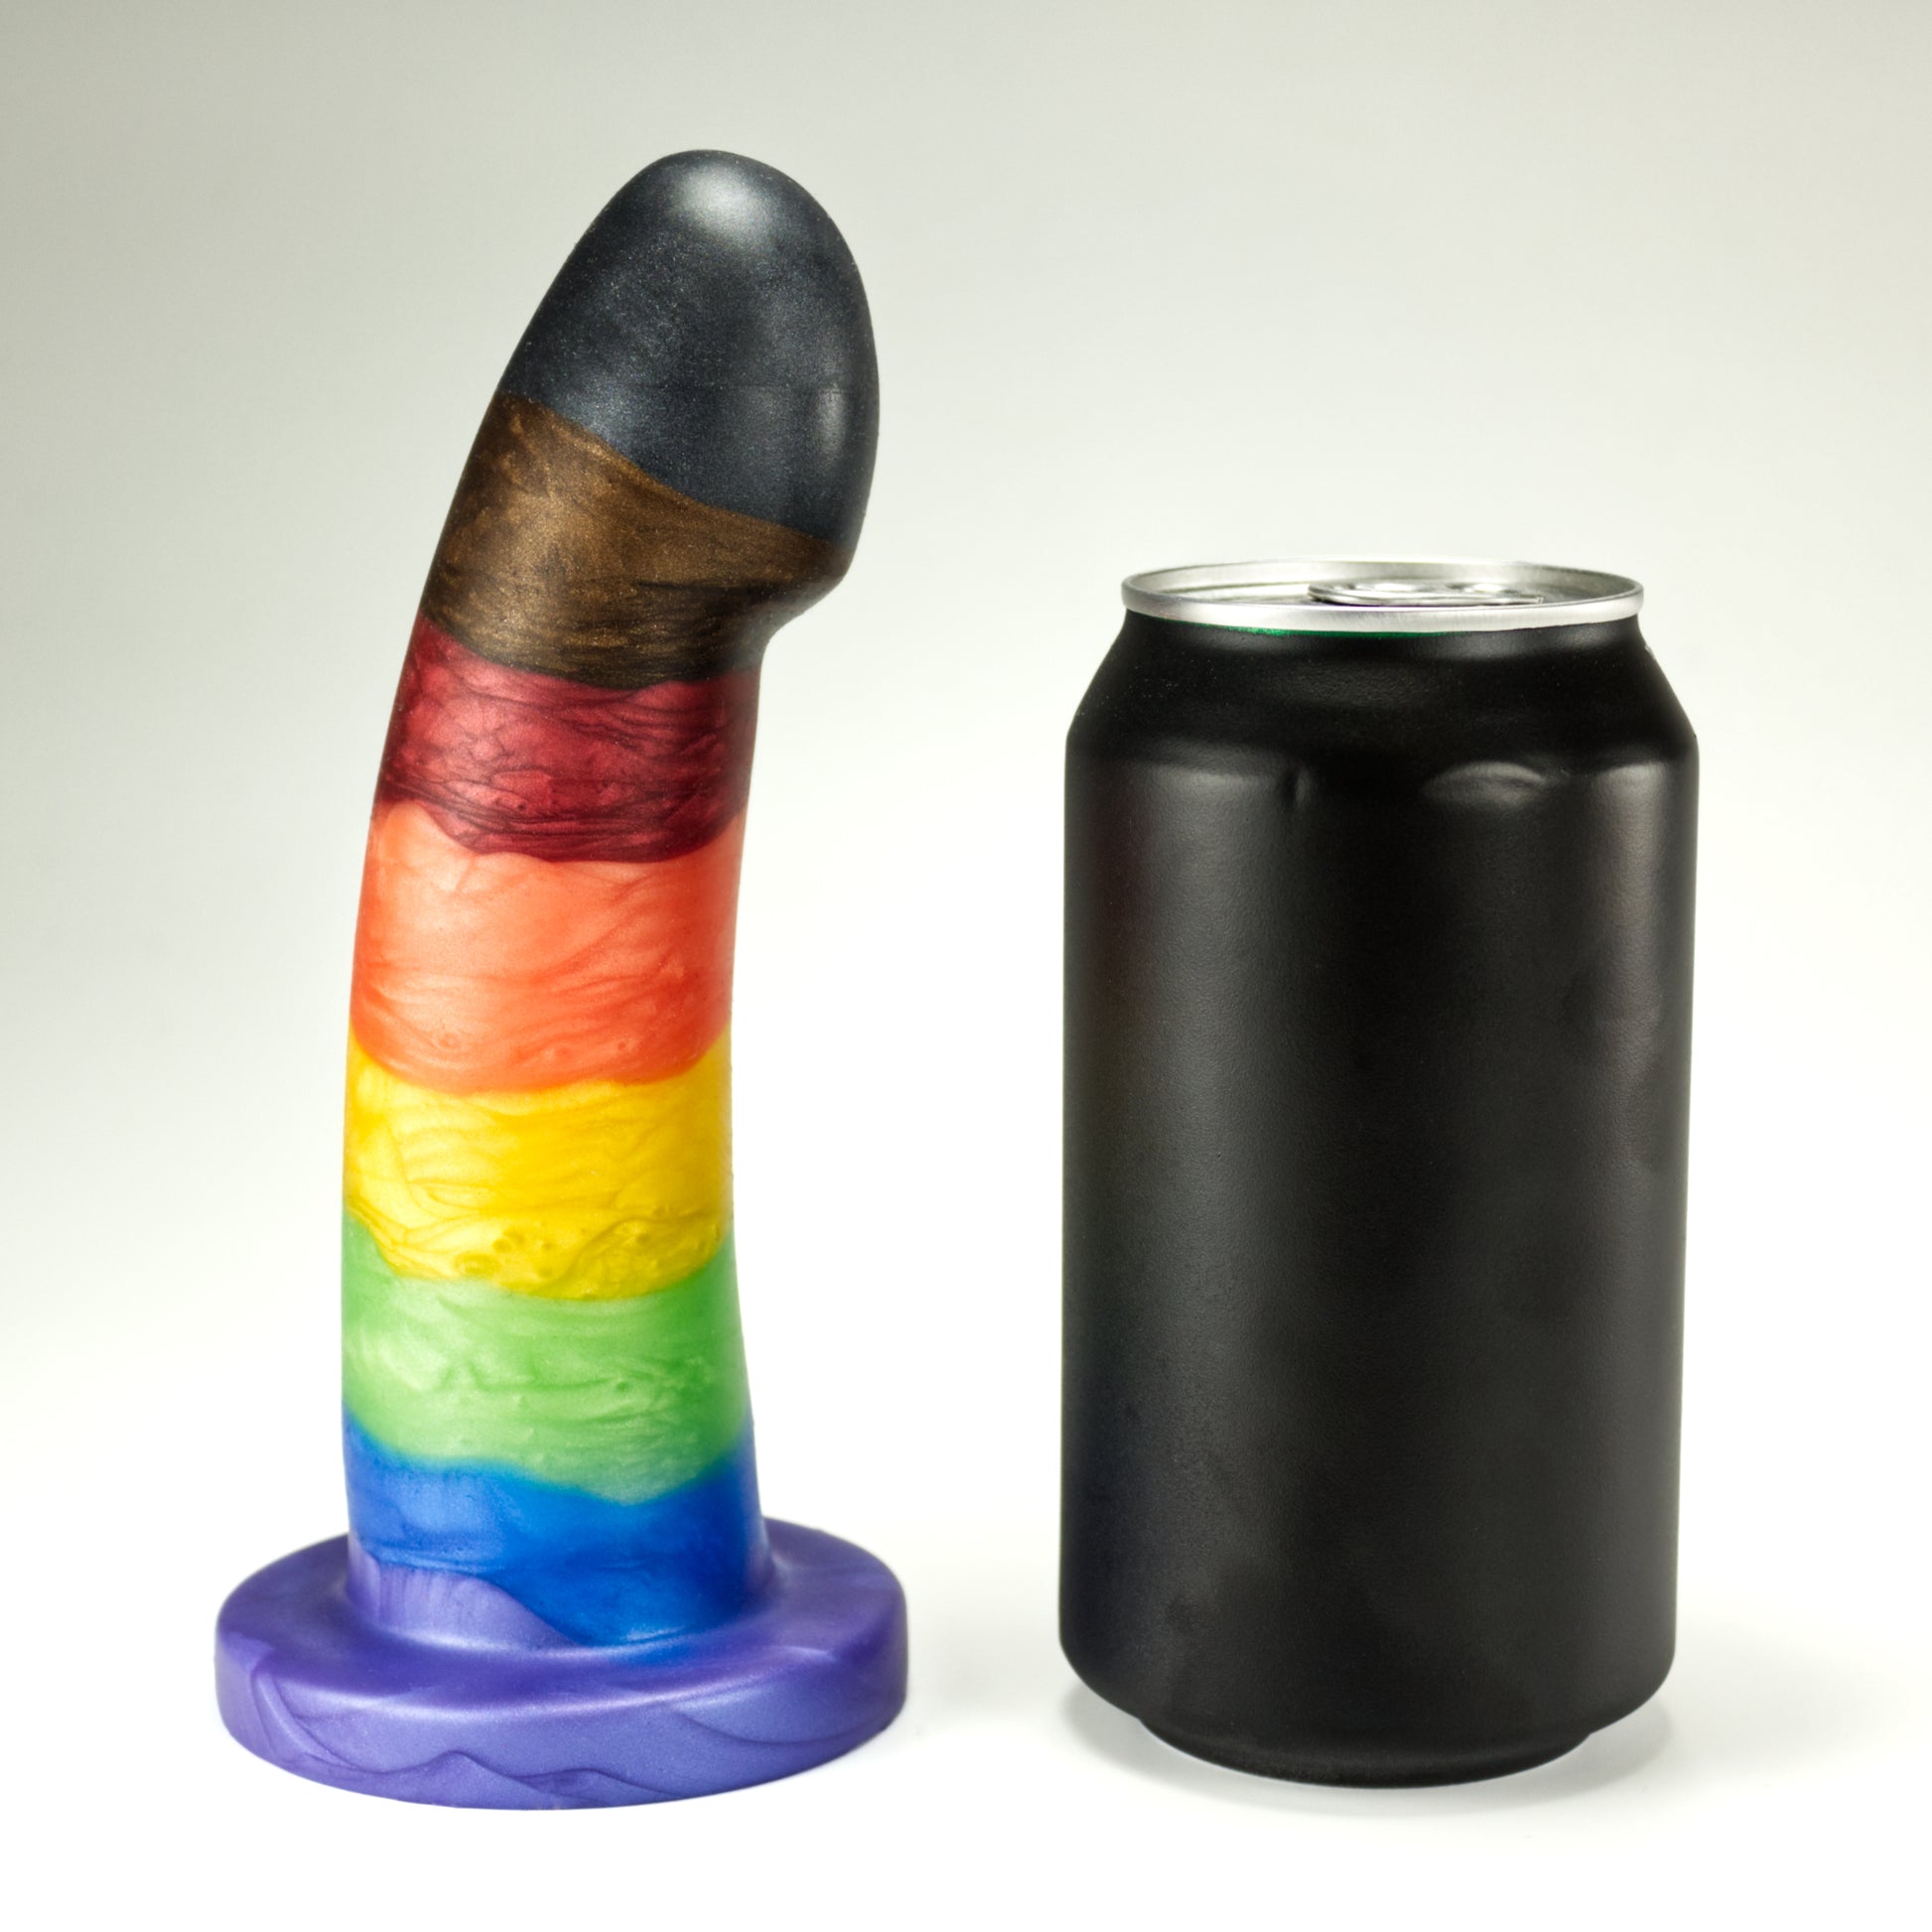 Side view of the Sidekick Medium next to a standard soda can, showing that the dildo is a little taller and about two thirds of the width of the can.